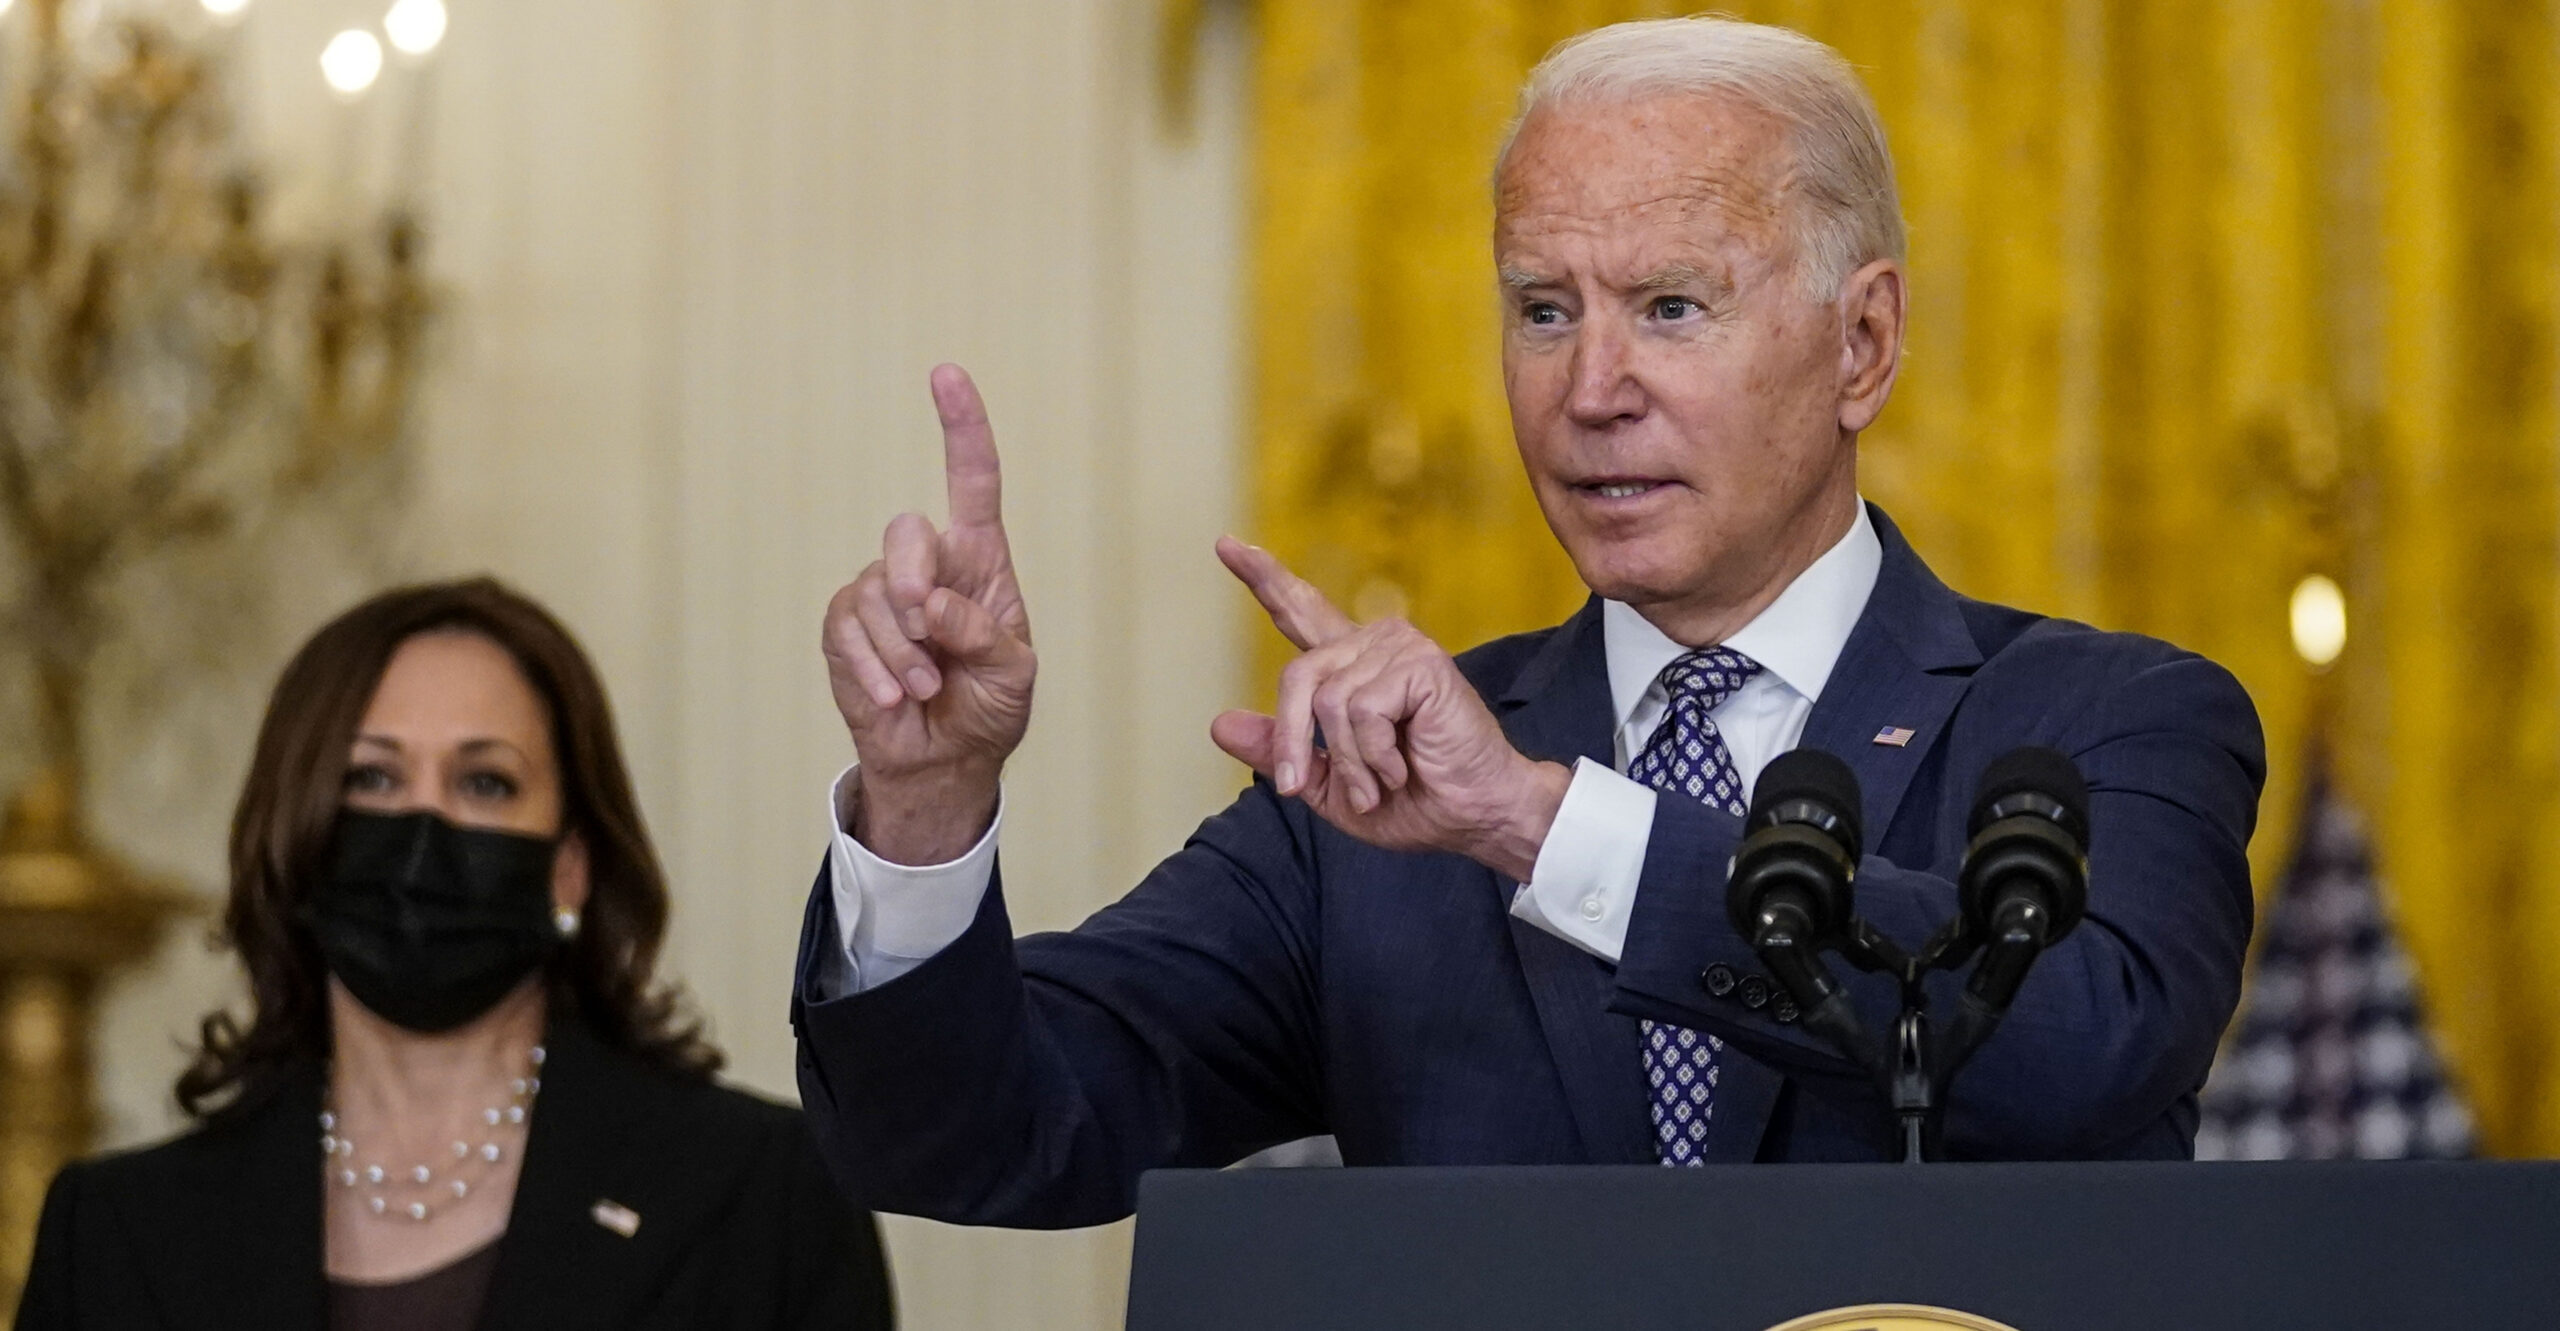 Biden Not Certain How Many Americans Stranded in Afghanistan